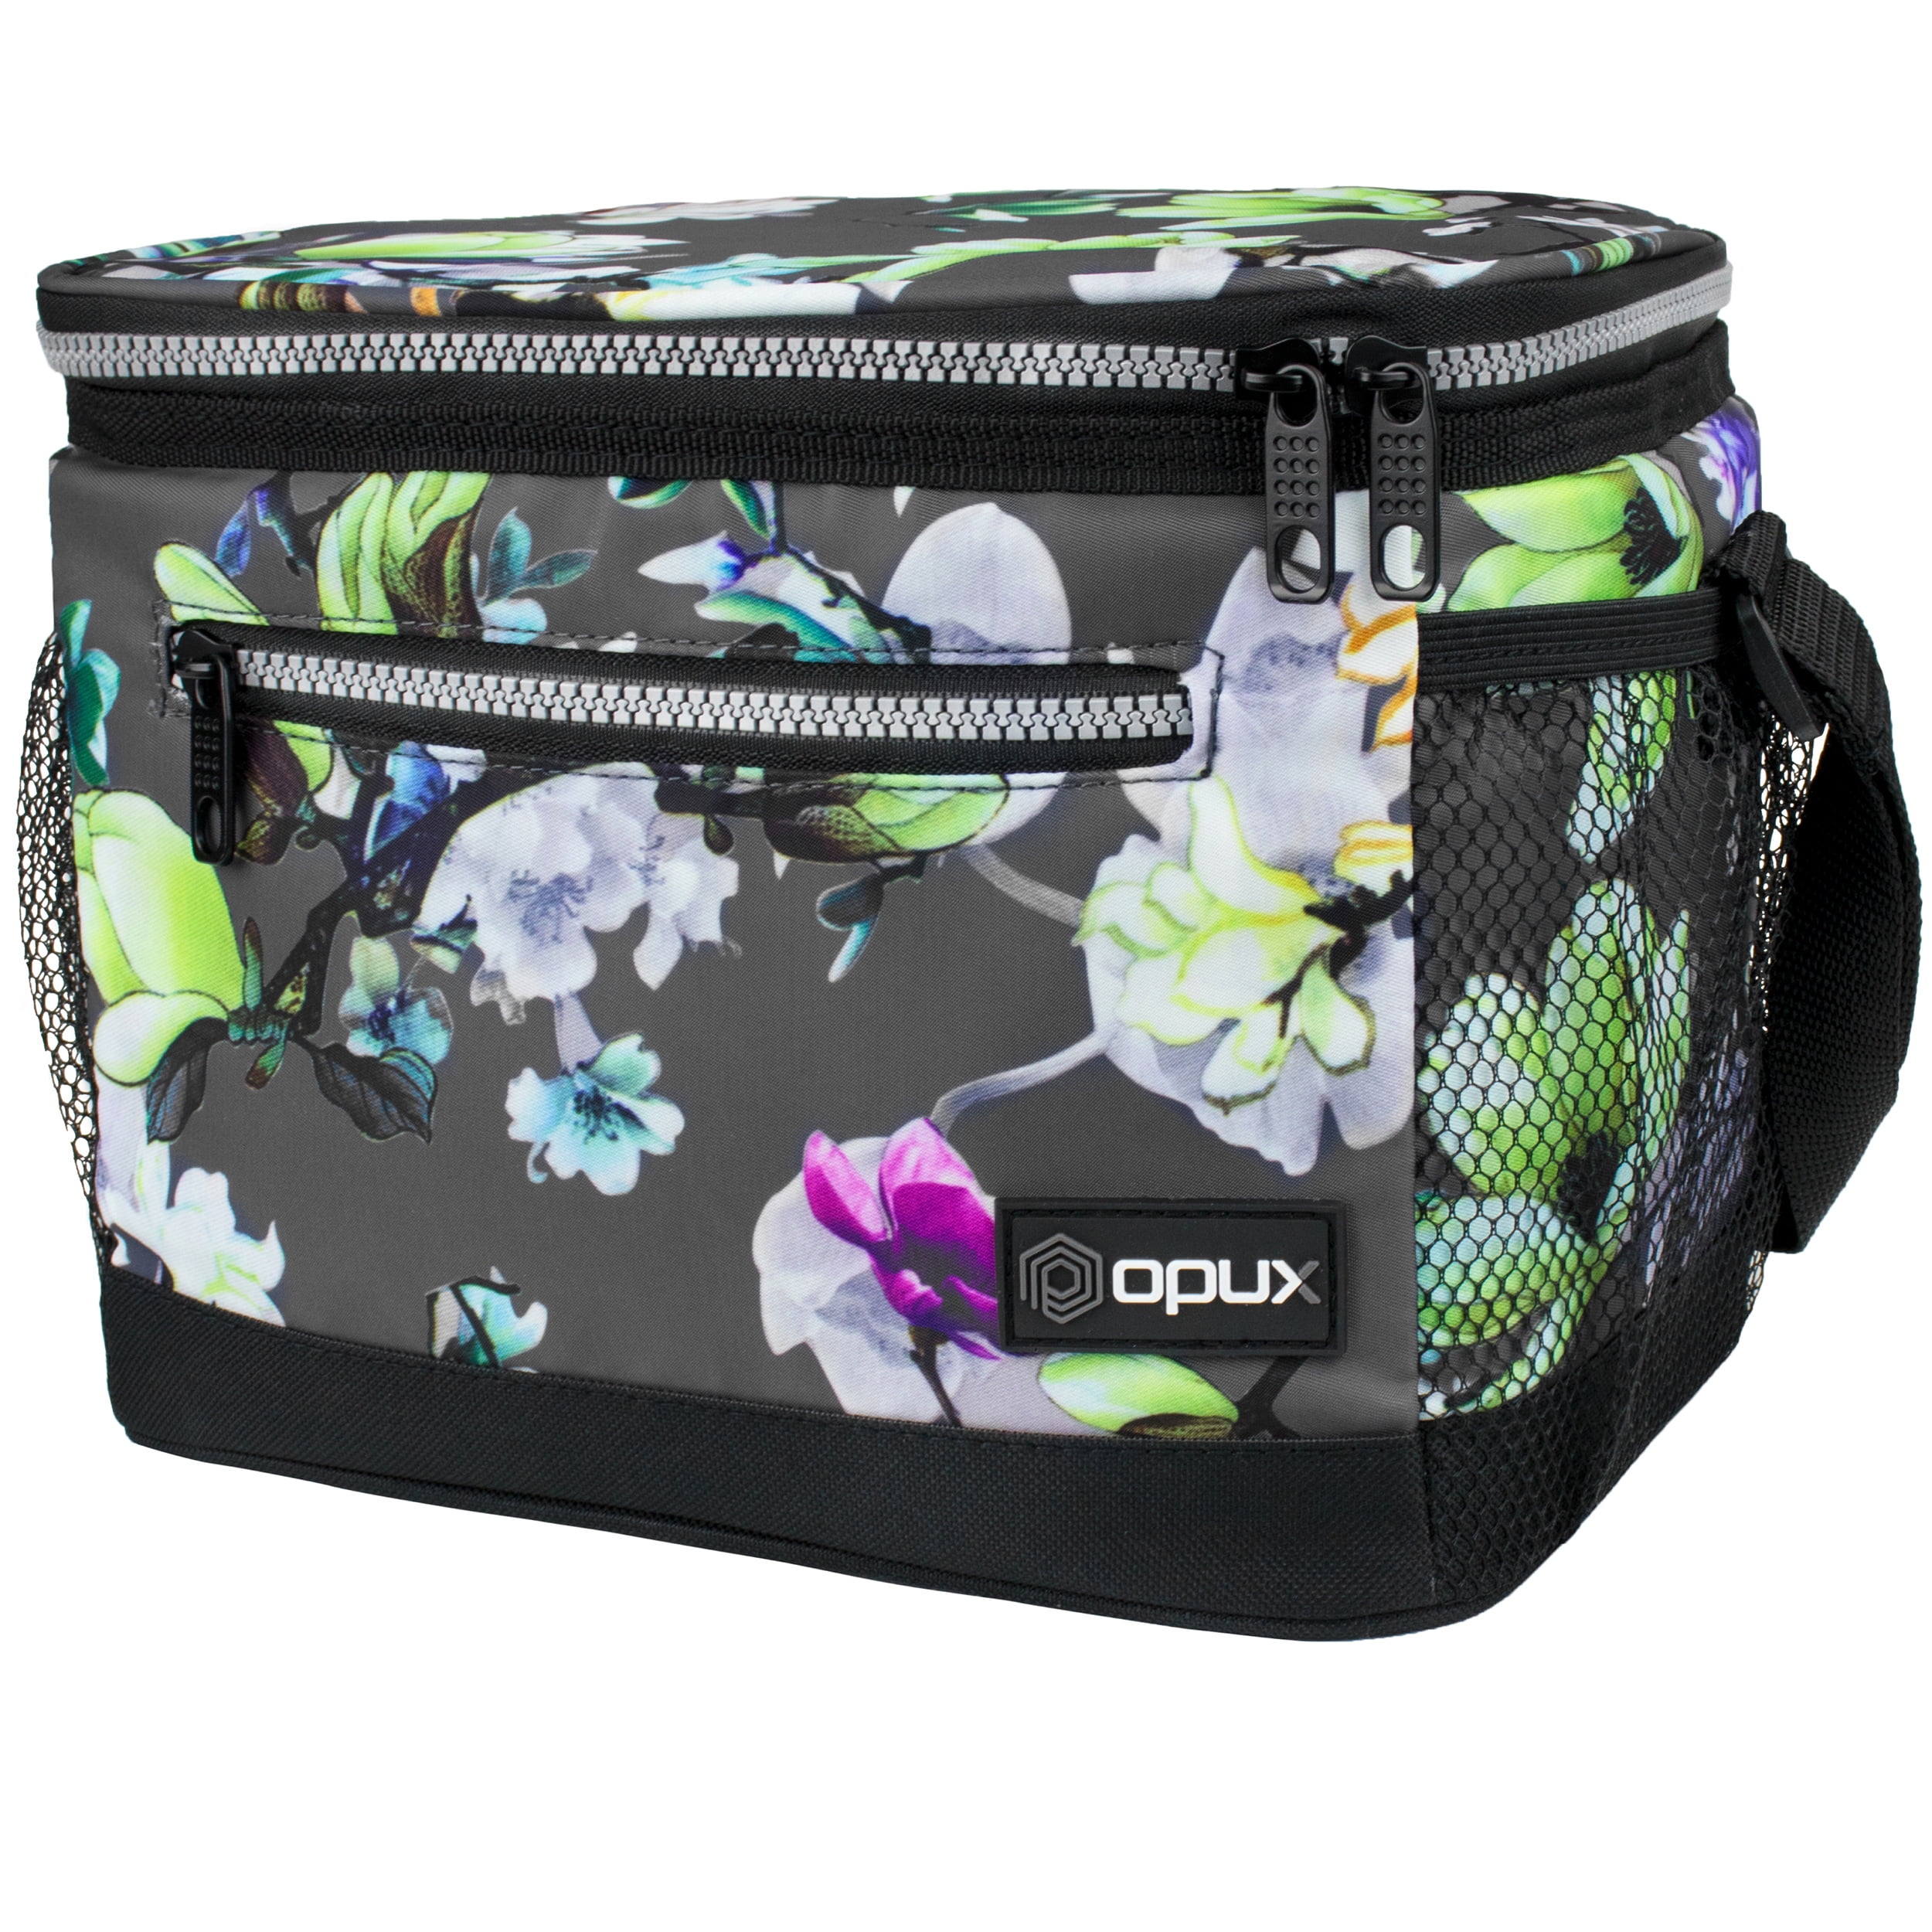 Neoprene Lunch Tote Bag Cooler Bag Reusable Waterproof Insulated Lunch Box COOFIT Lunch Bag 